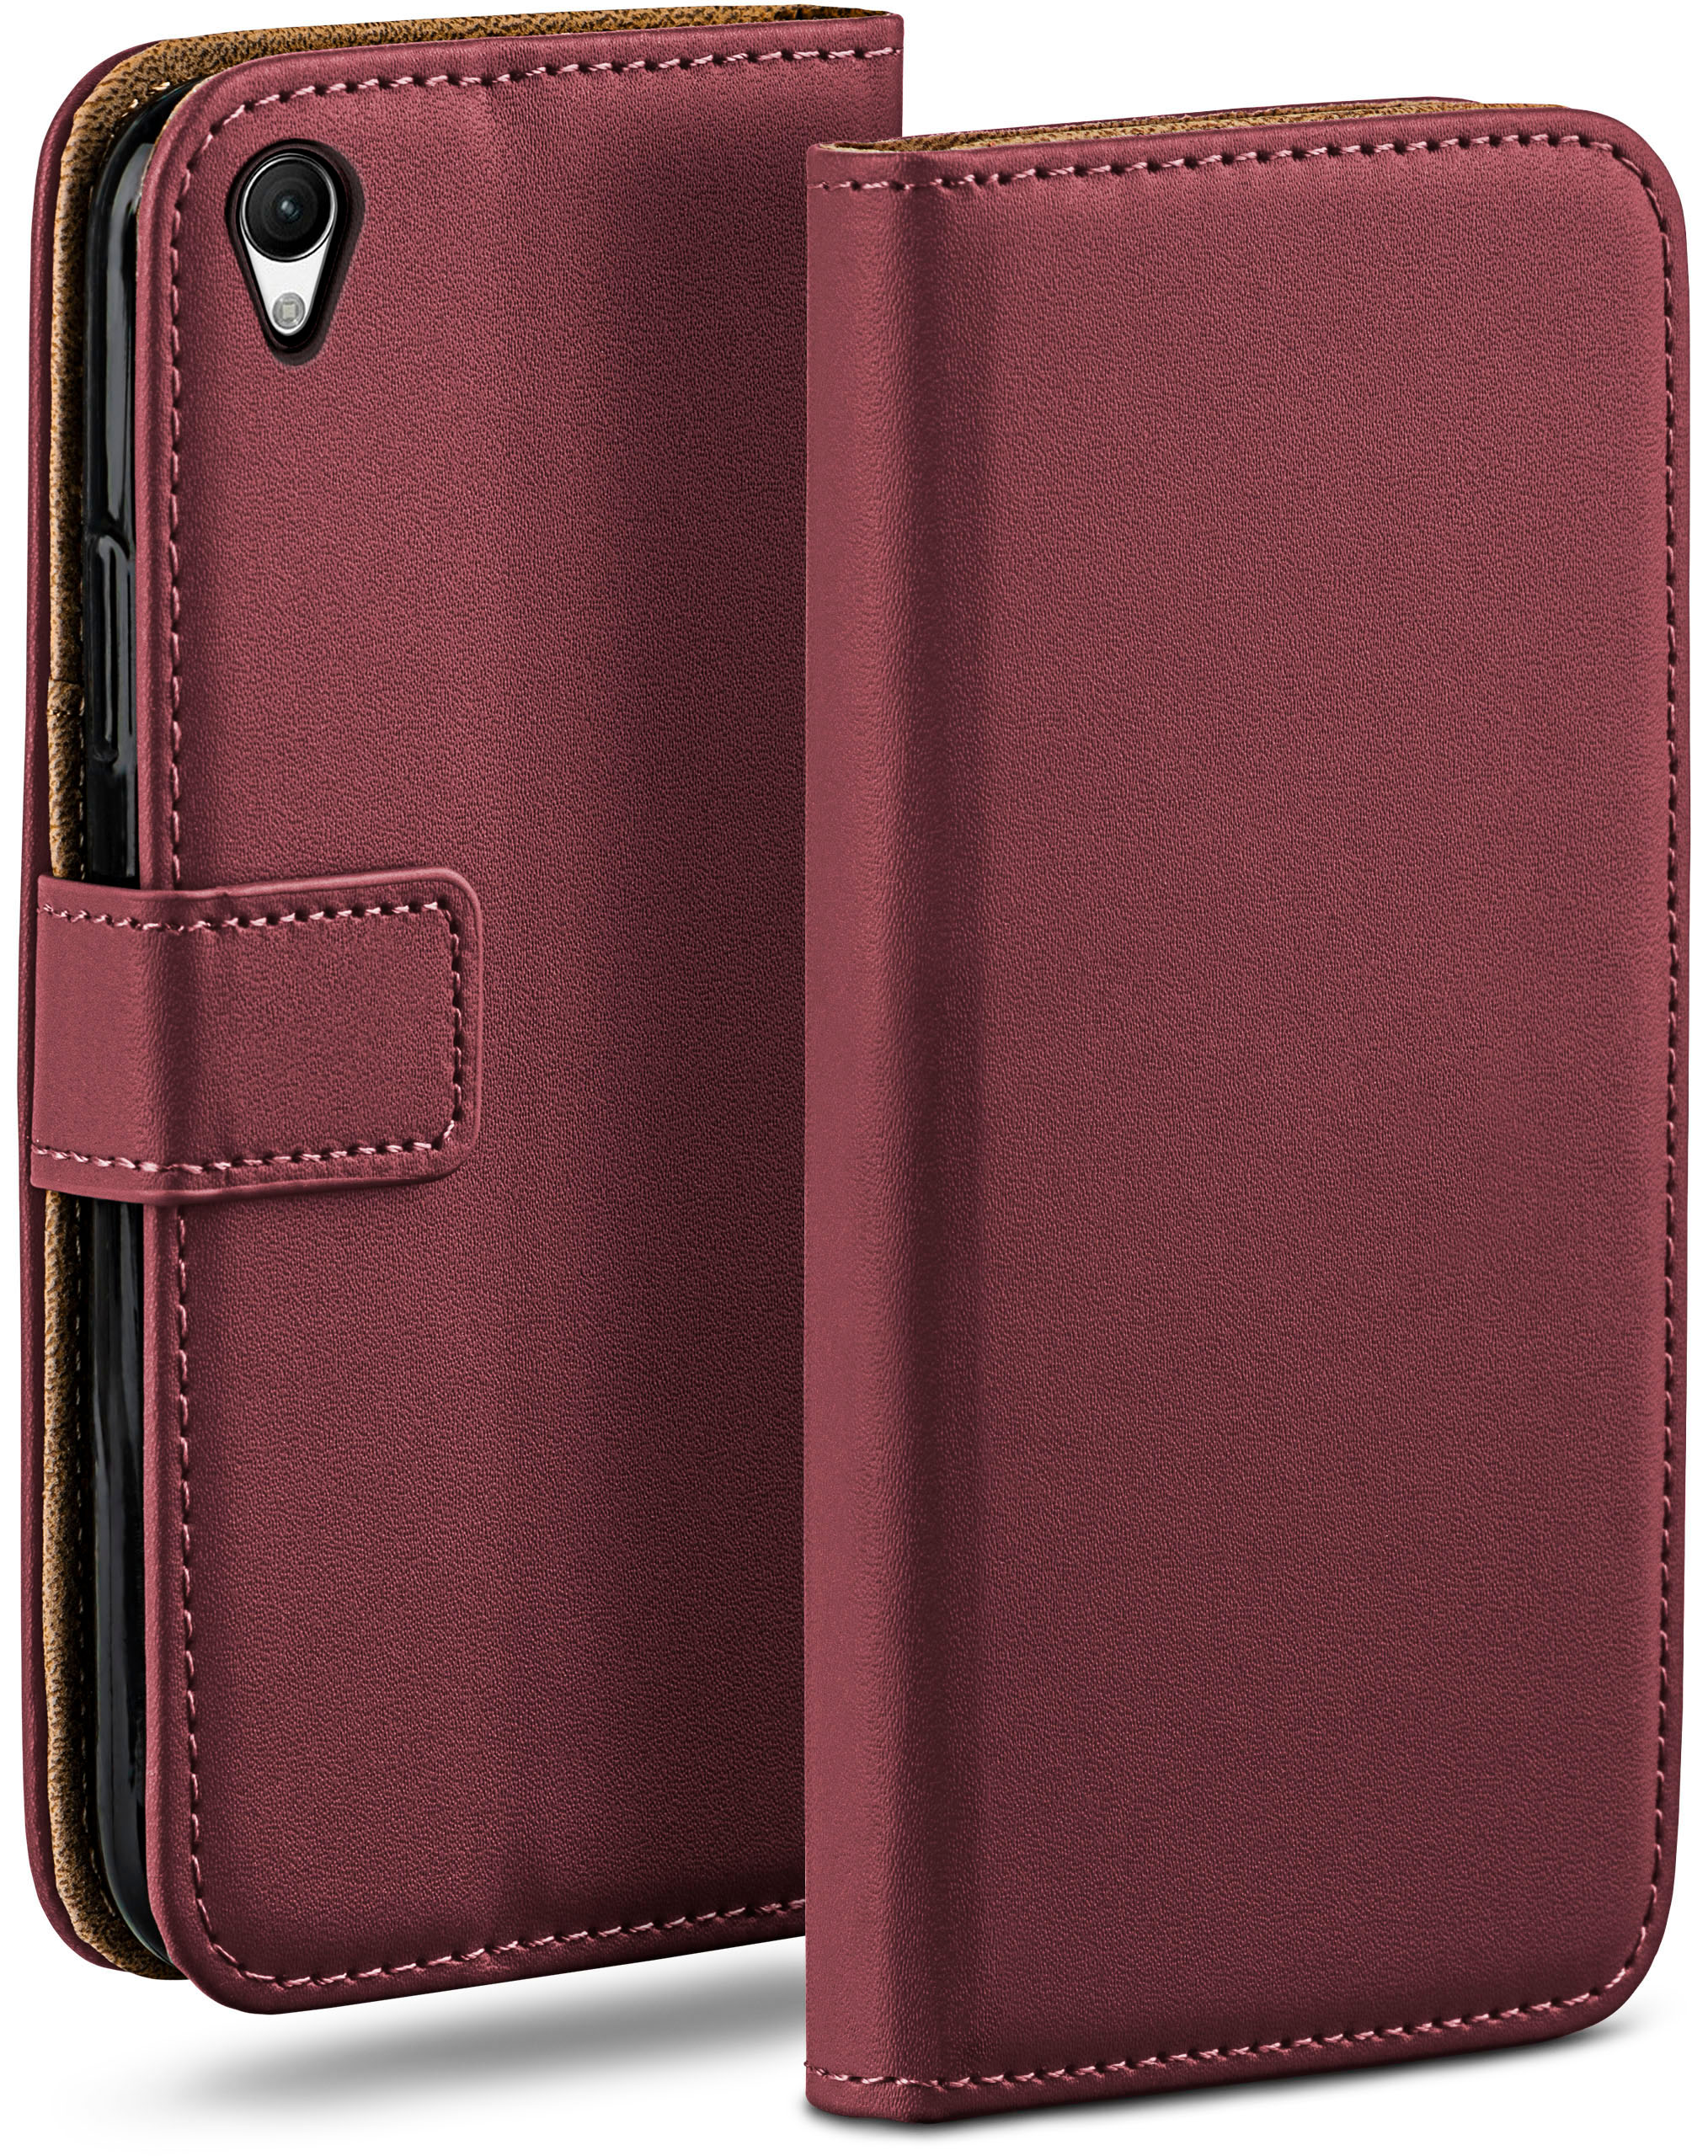 MOEX Book Case, Bookcover, Sony, Maroon-Red Xperia Z3